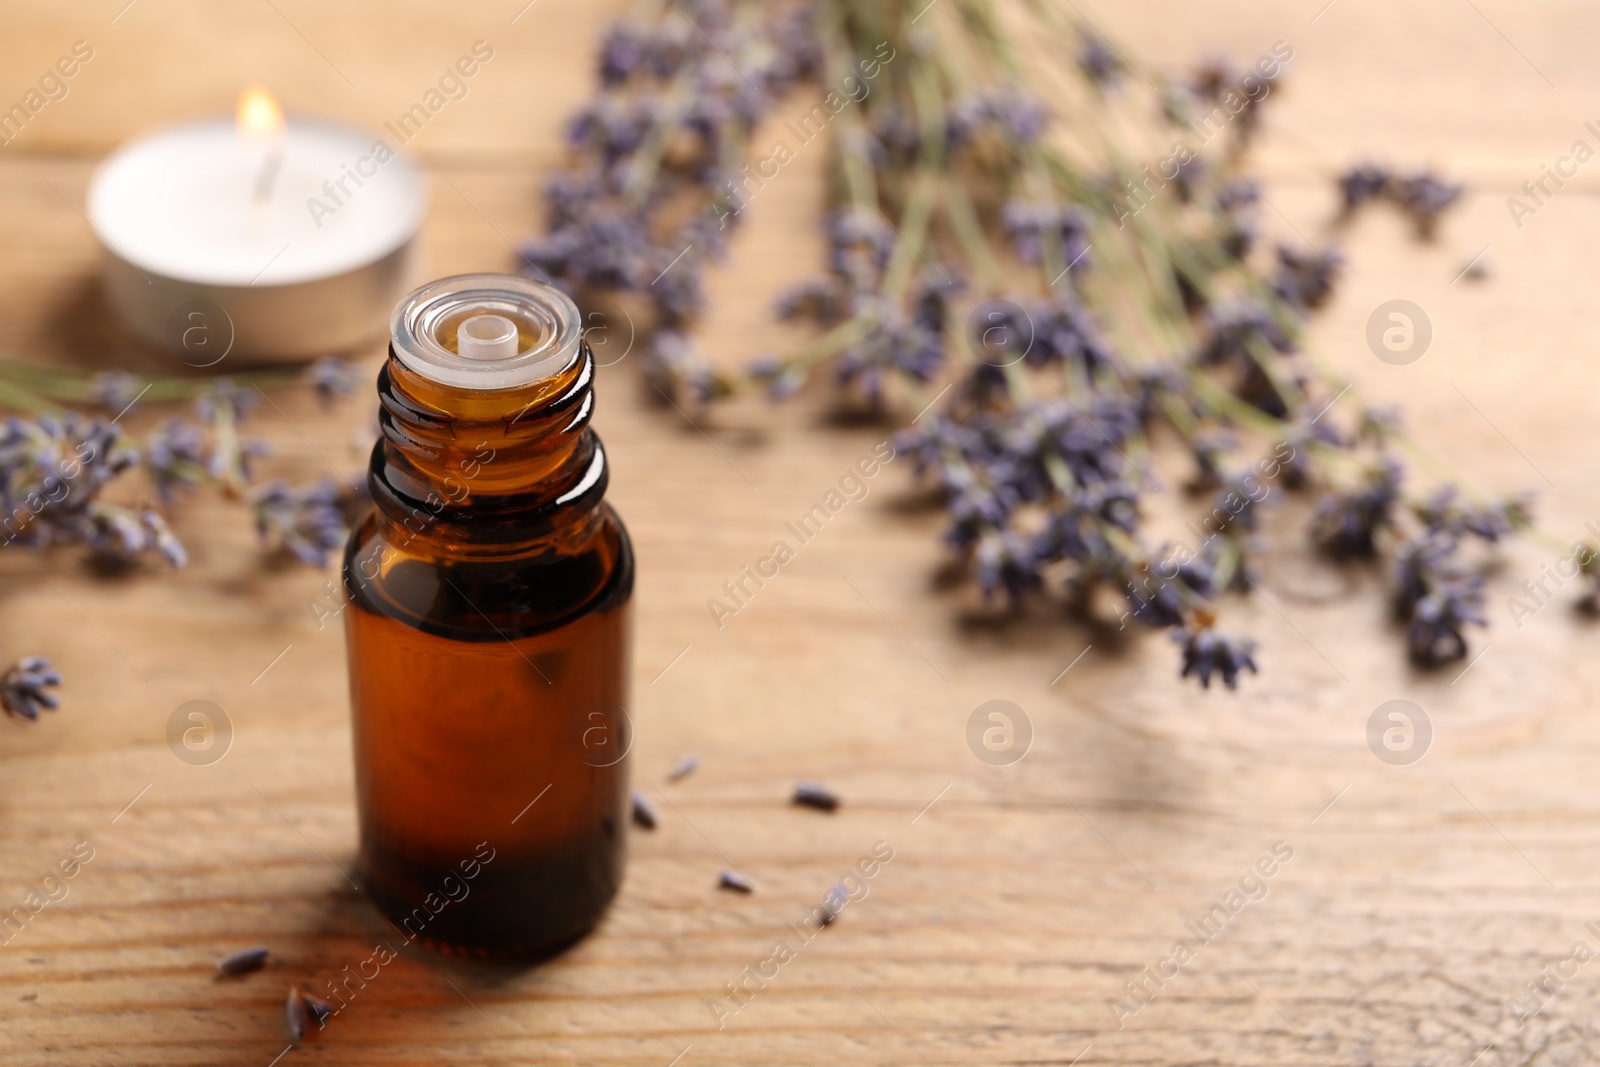 Photo of Bottle of essential oil and lavender flowers on wooden table, space for text